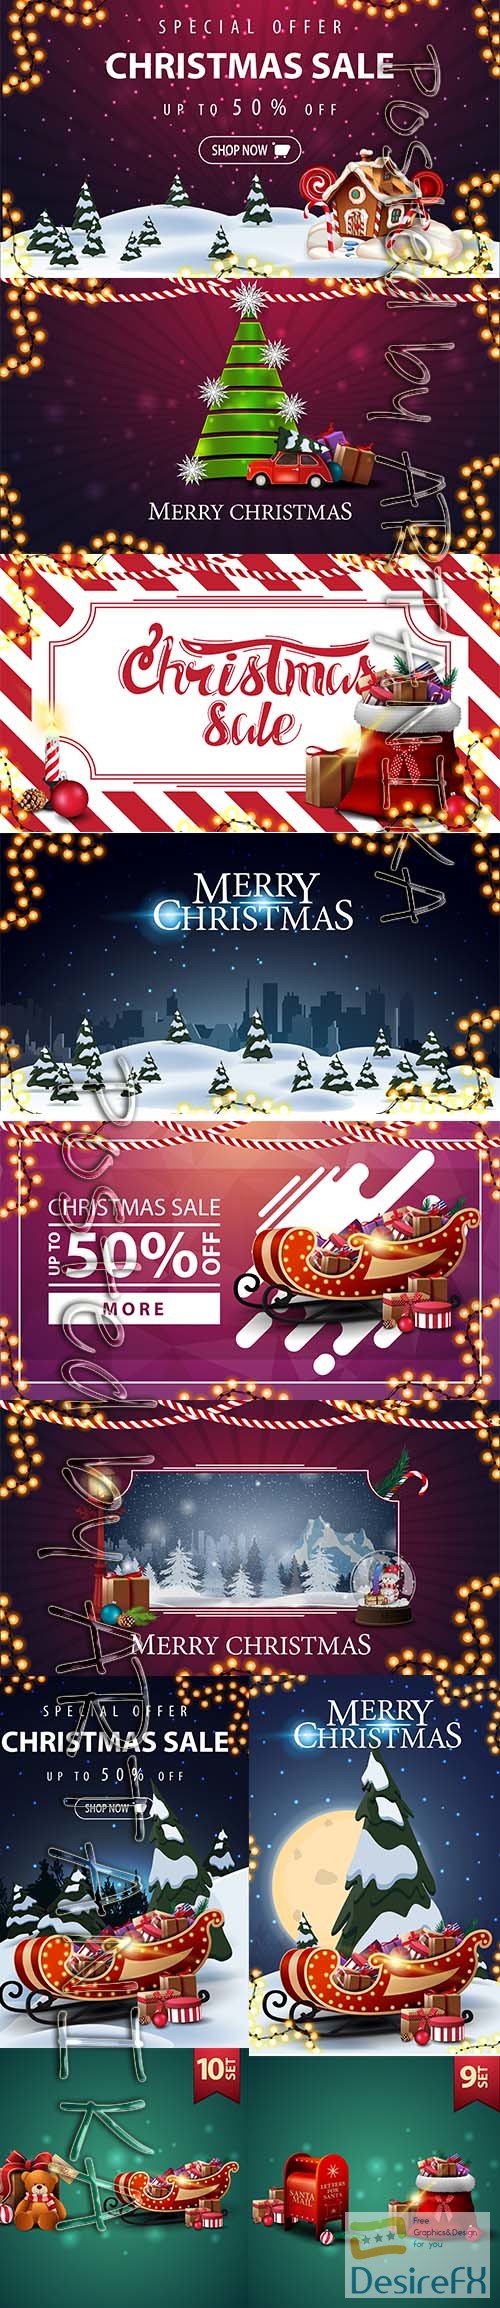 Christmas Sale Discount Banner and Illustrations Set